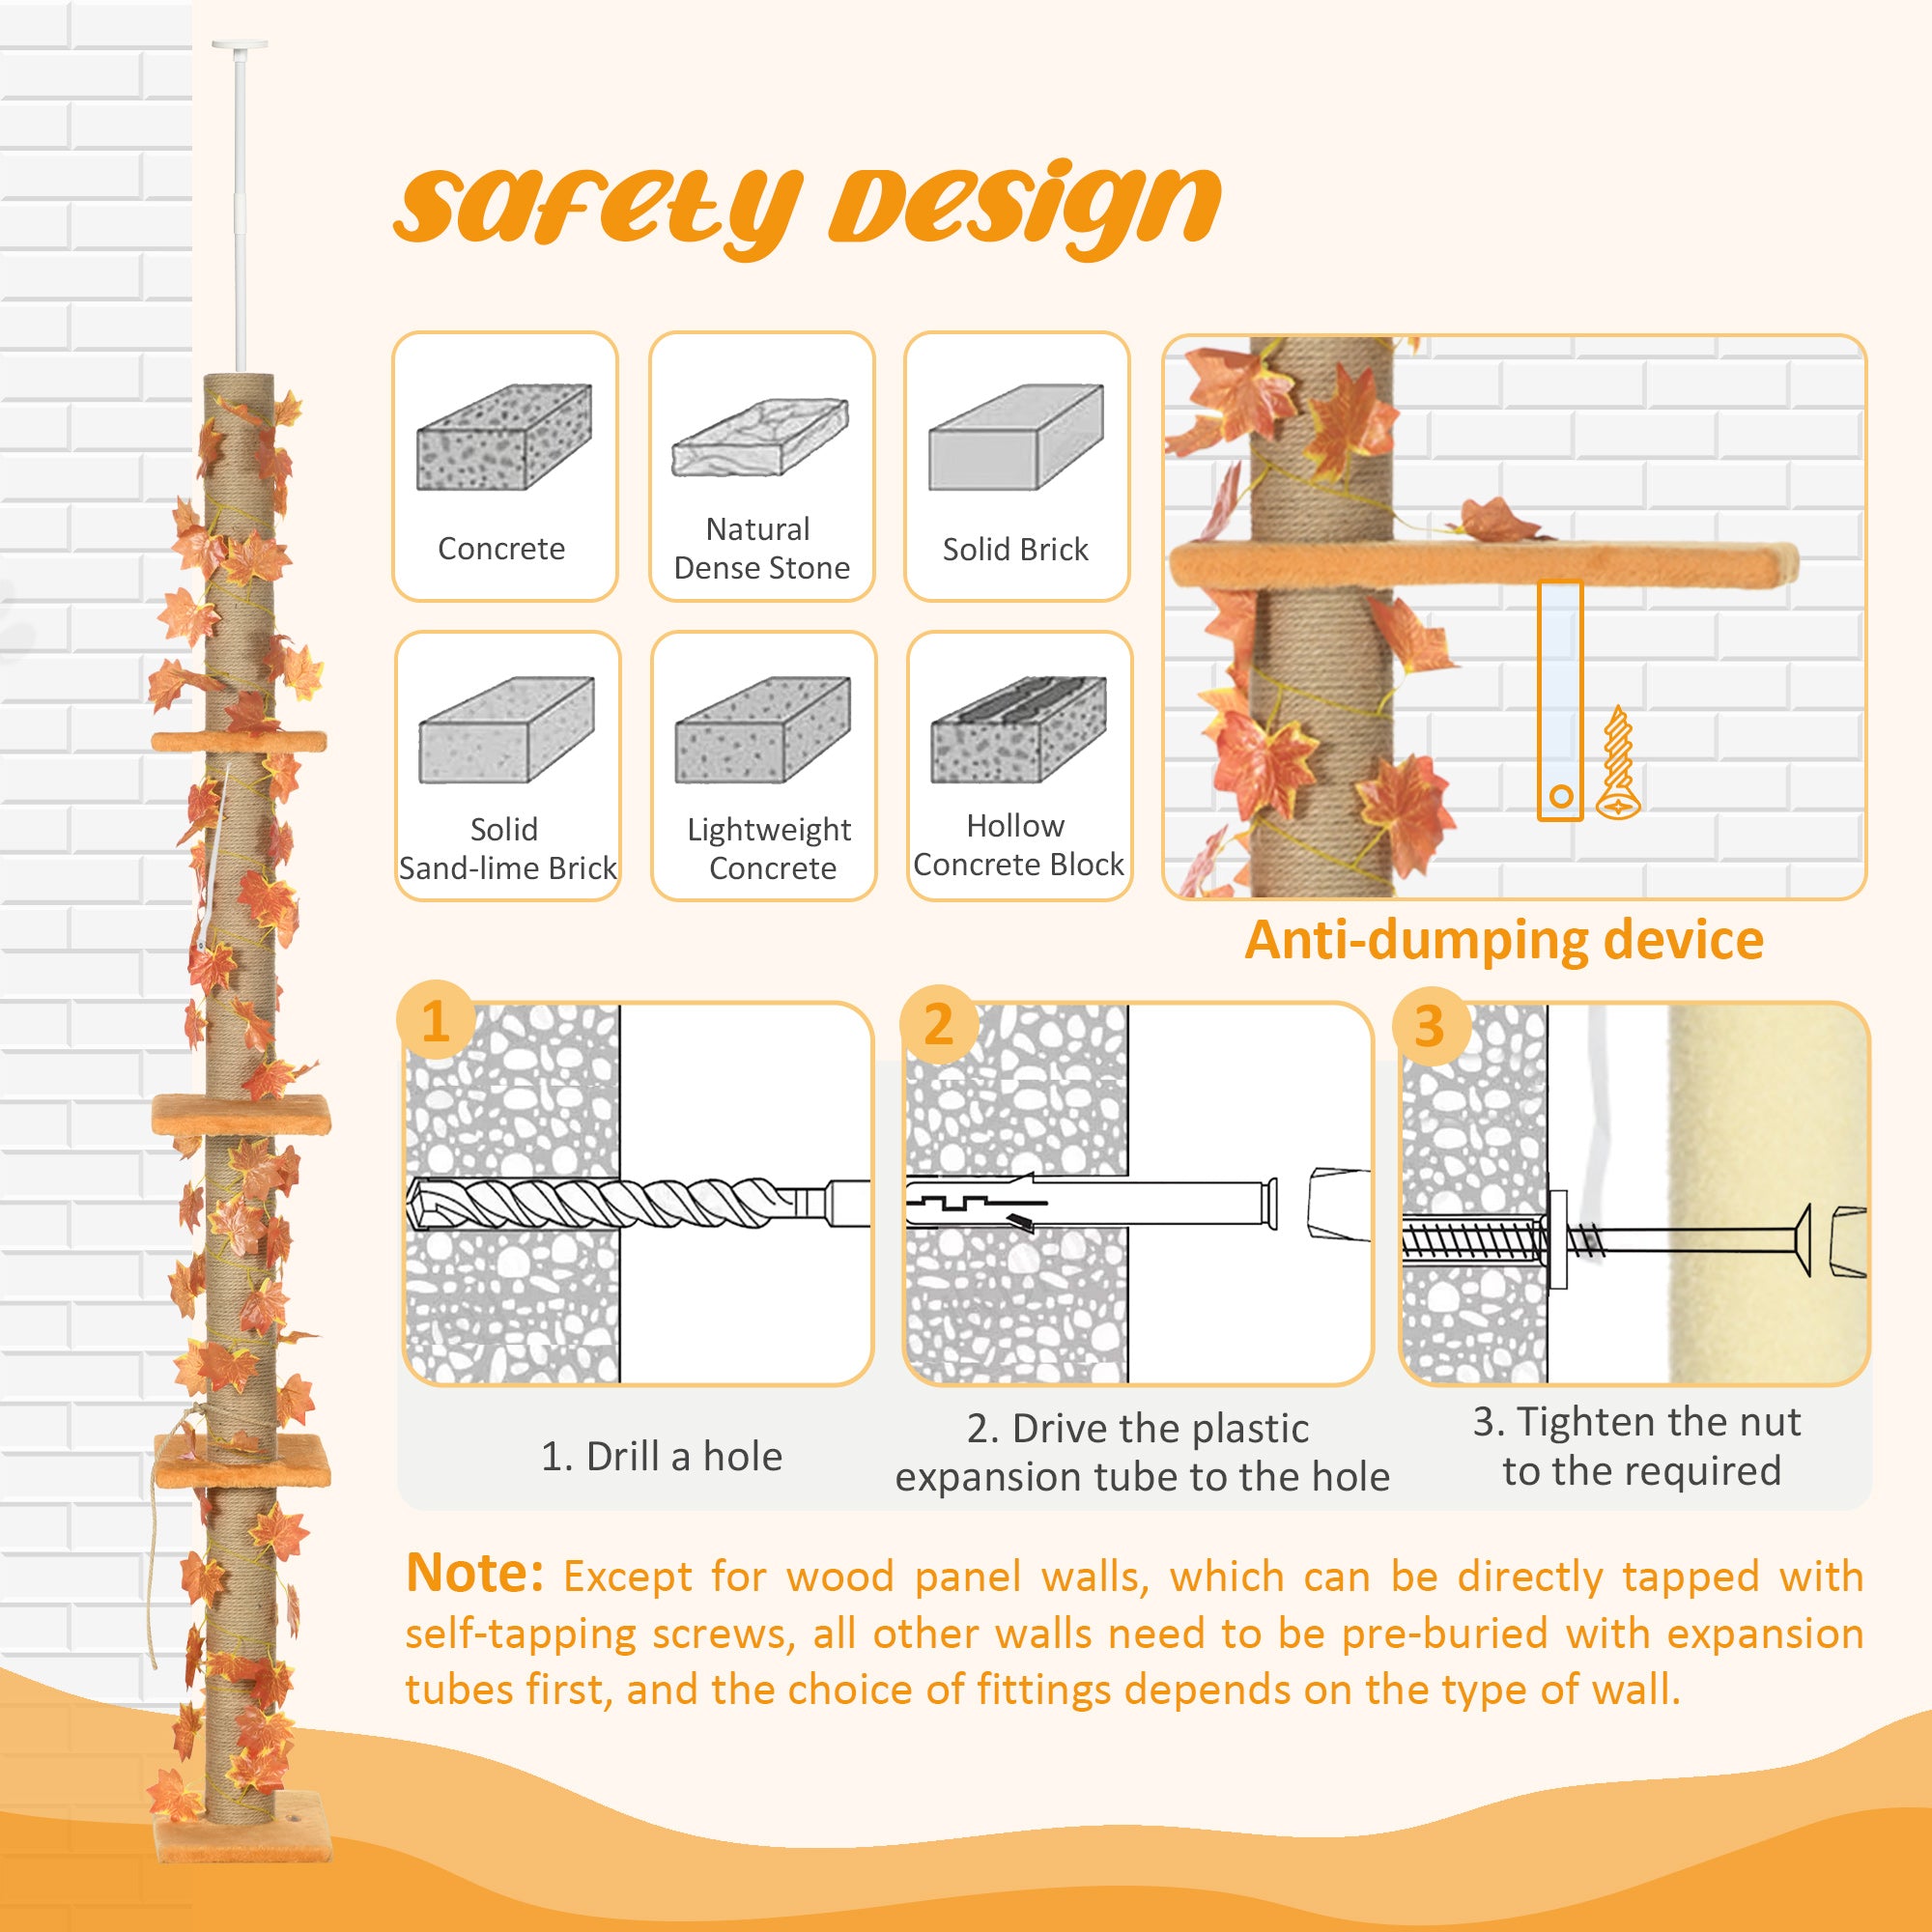 PawHut 202-242cm Height Adjustable Floor to Ceiling Cat Tree for Indoor Cats with Sisal Scratching Post, 3- Tier Cat Tower Climbing Activity Centre with Platforms, Leaves, Orange